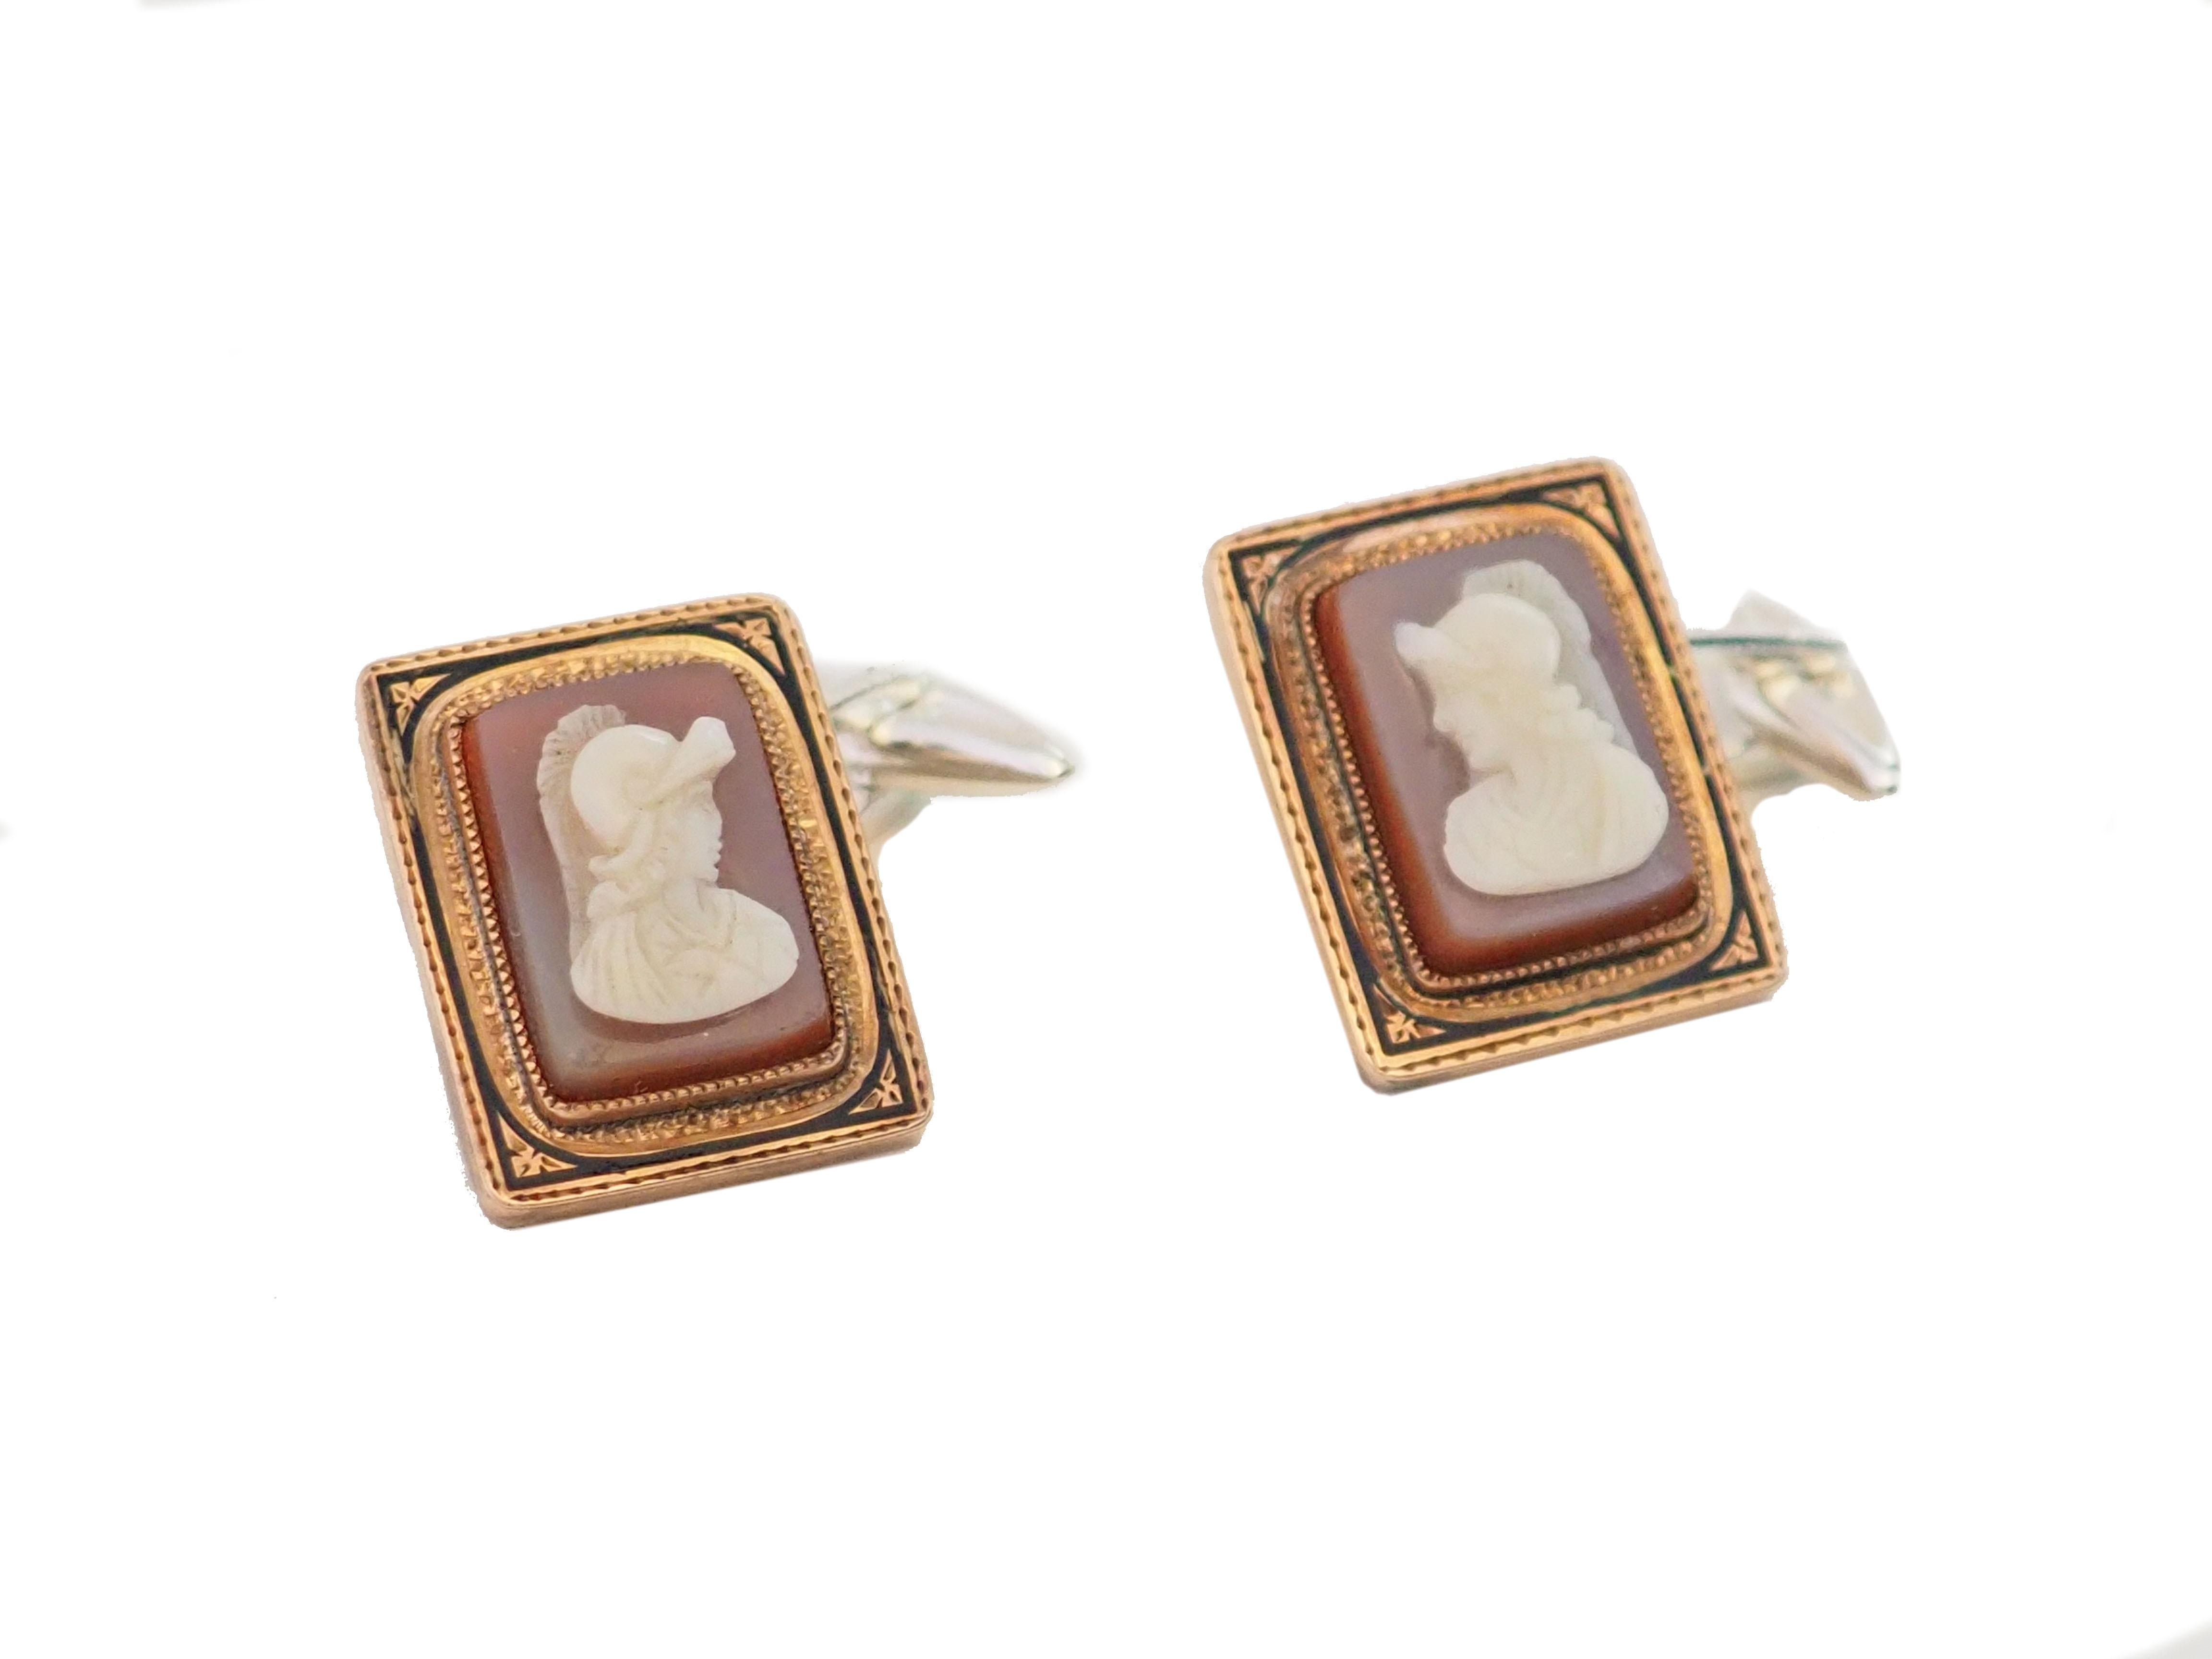 Antiques Victorian Cameo Silver 10k Gold Cufflinks.
All Giulia Colussi jewelry is new and has never been previously owned or worn. Each item will arrive at your door beautifully gift wrapped in our boxes, put inside an elegant pouch or jewel box.